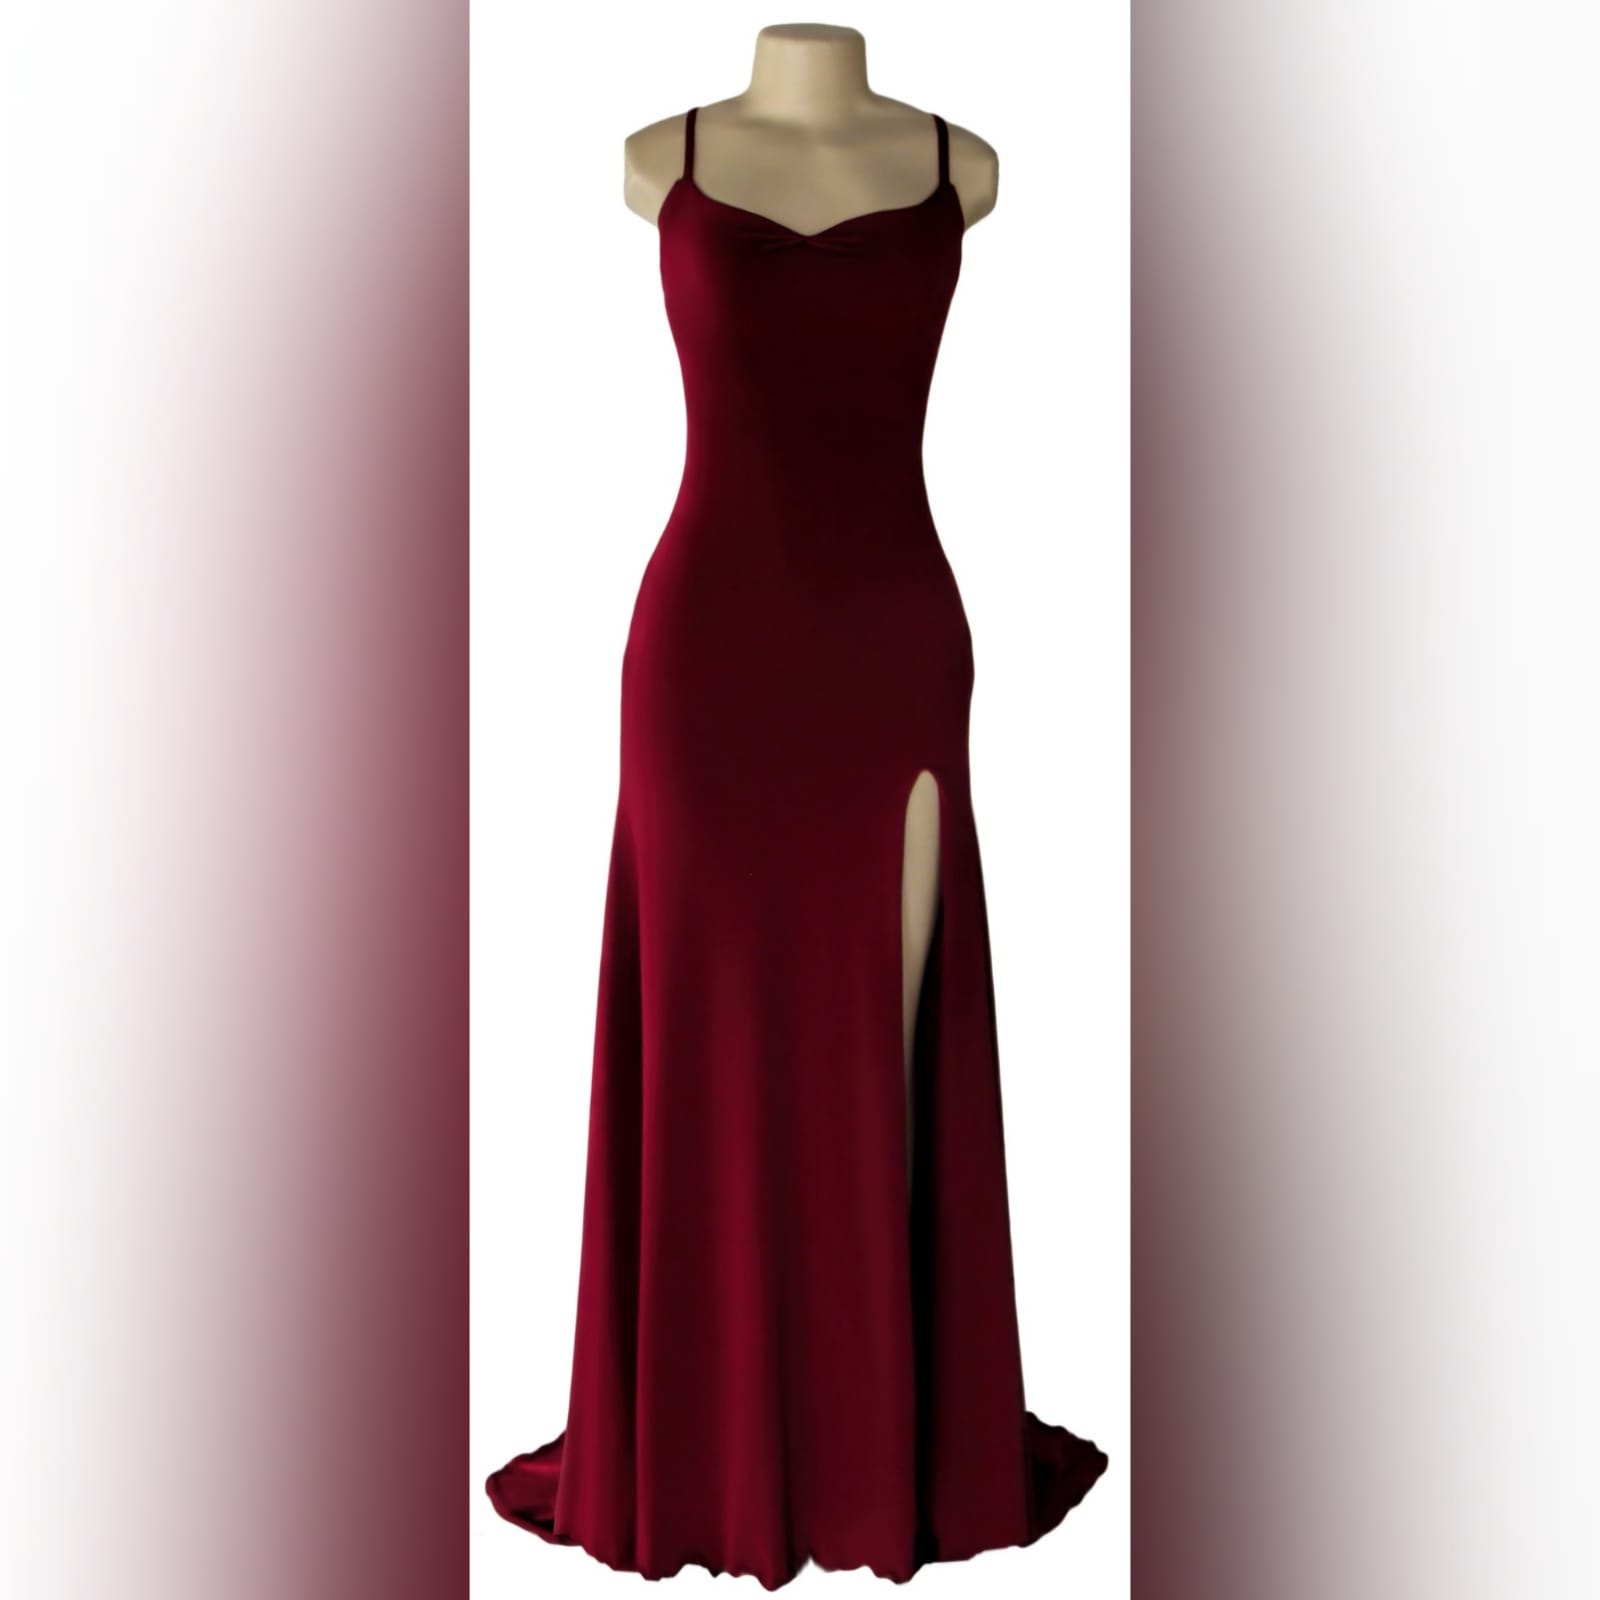 Maroon lace-up back long simple matric dance dress 4 maroon lace-up back long simple matric dance dress with thin shoulder straps, high slit and a small train. Lace-up back to adjust the fit.